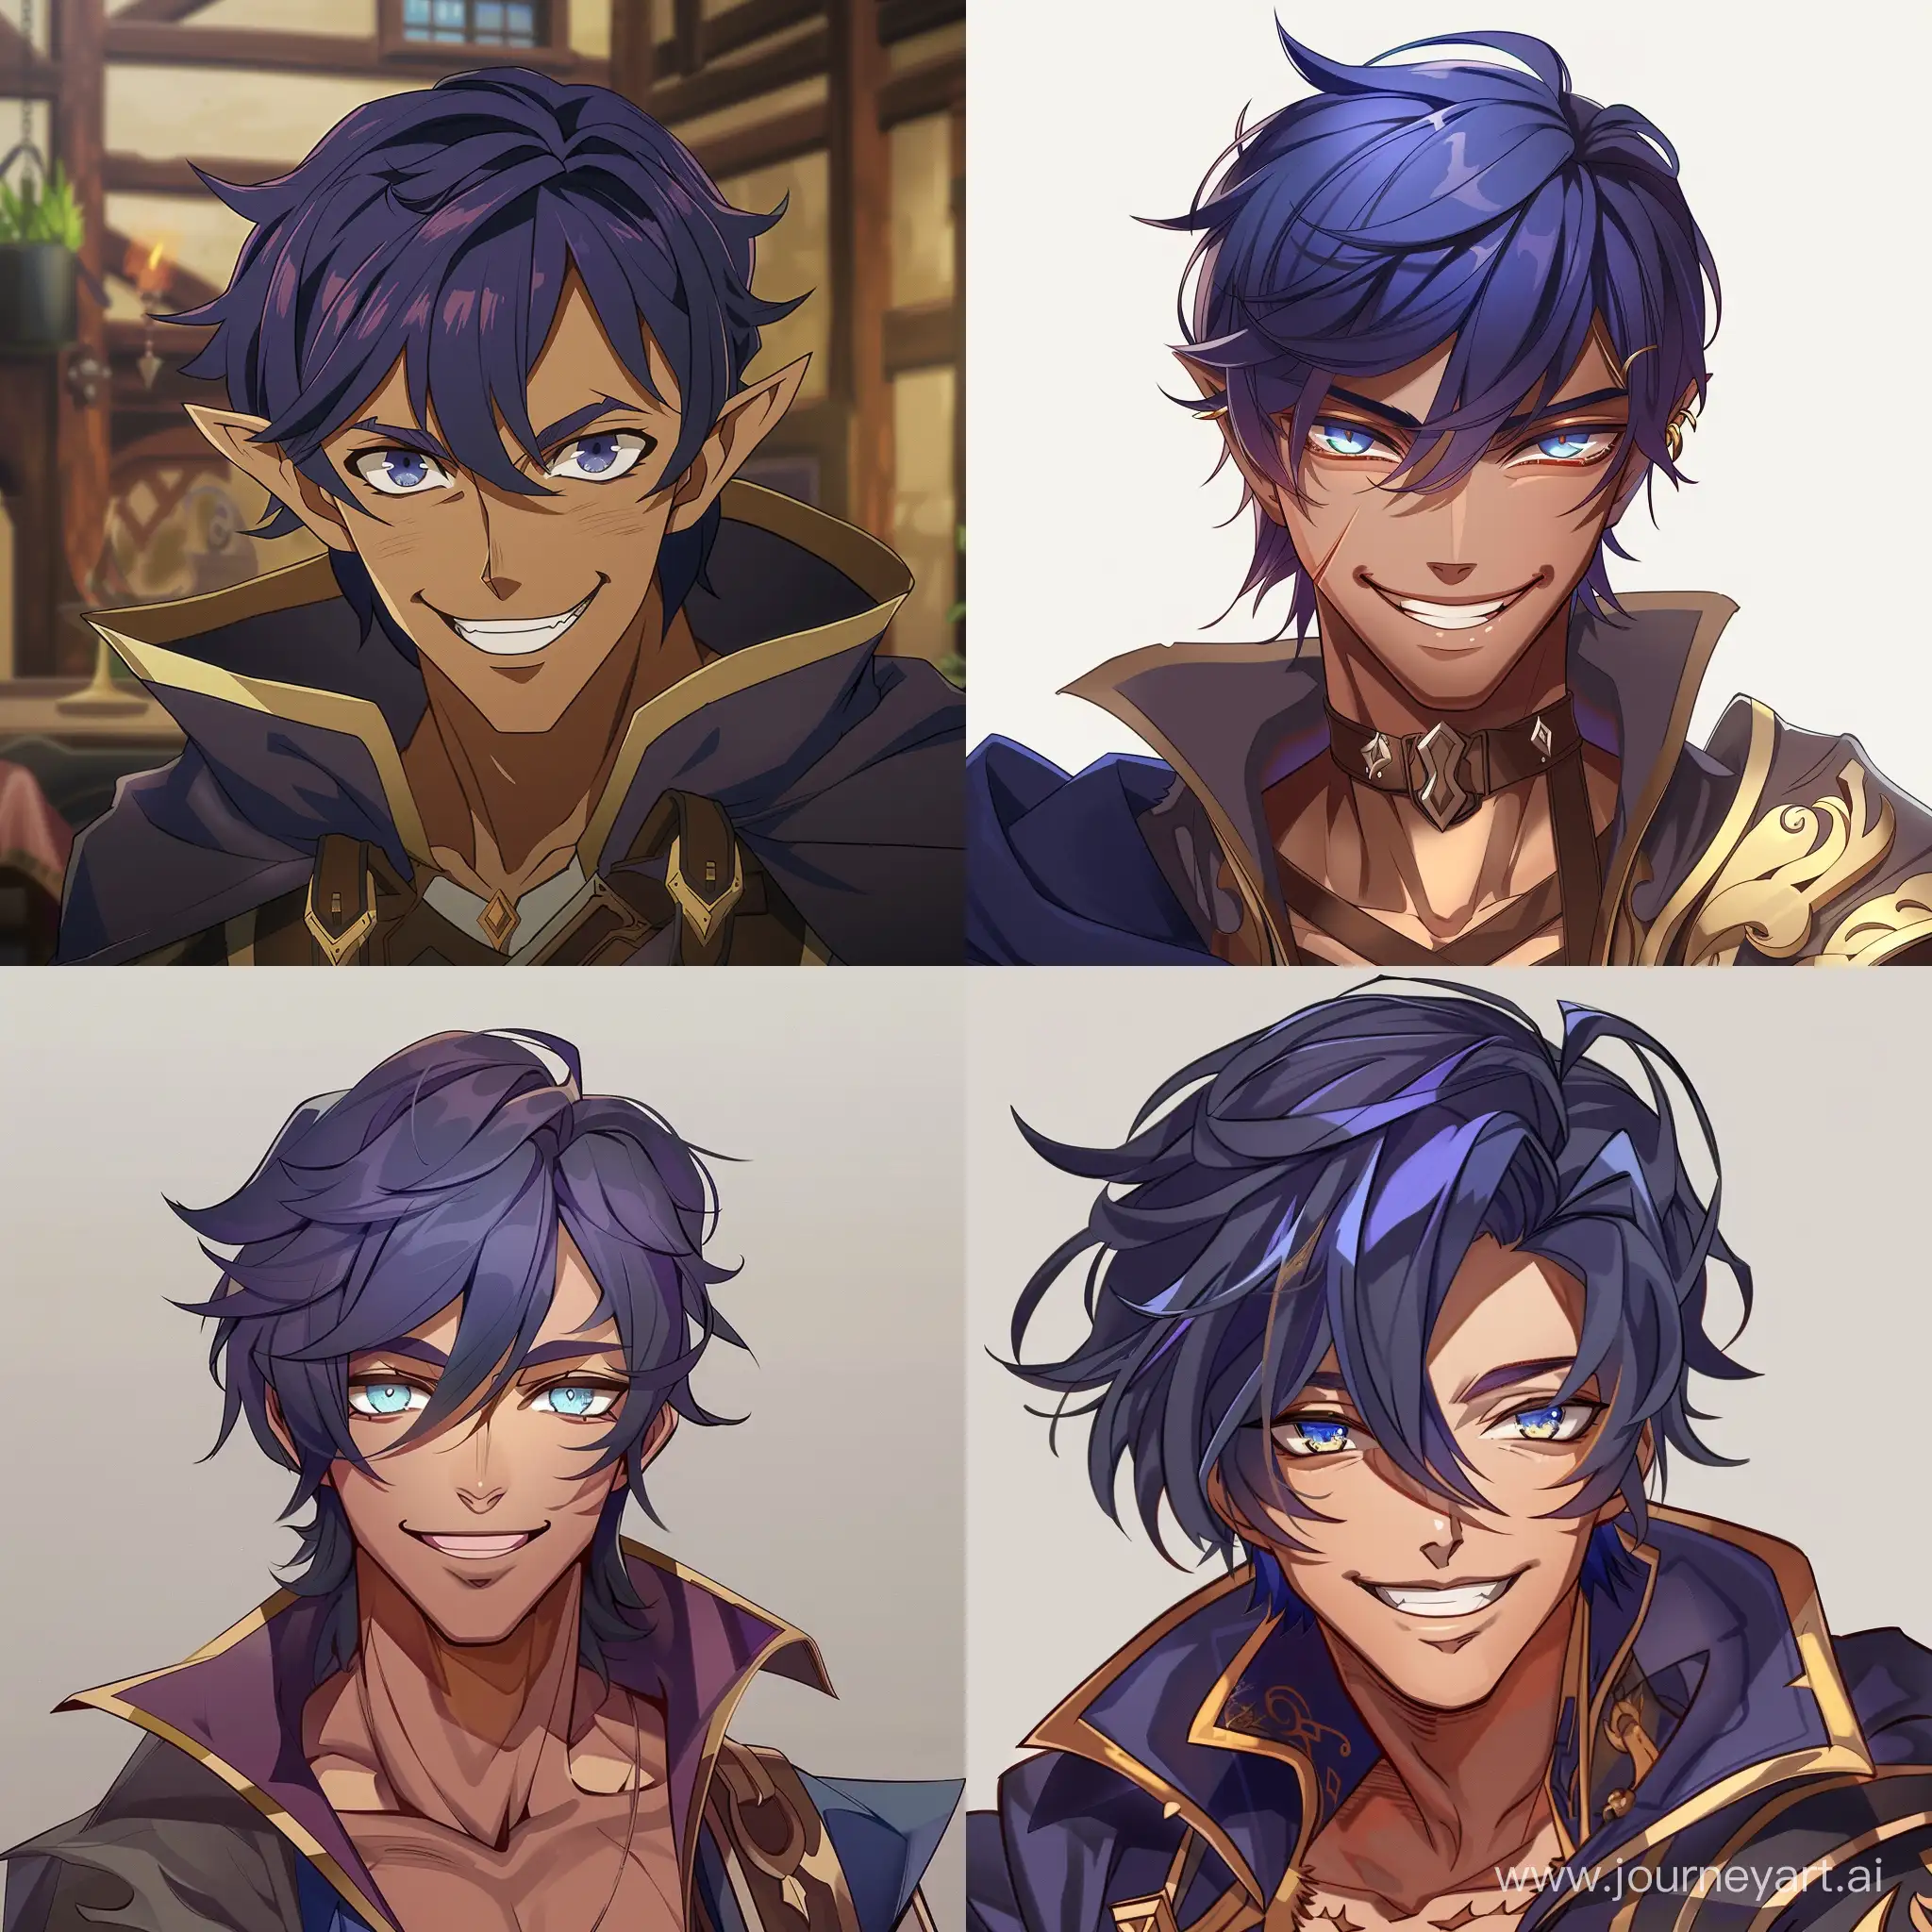 Male anime character, azure eyes, dark purple blueish hair, bronze skin, smug grin and sexy look in his eyes. He wears the outfit of a dark mage.